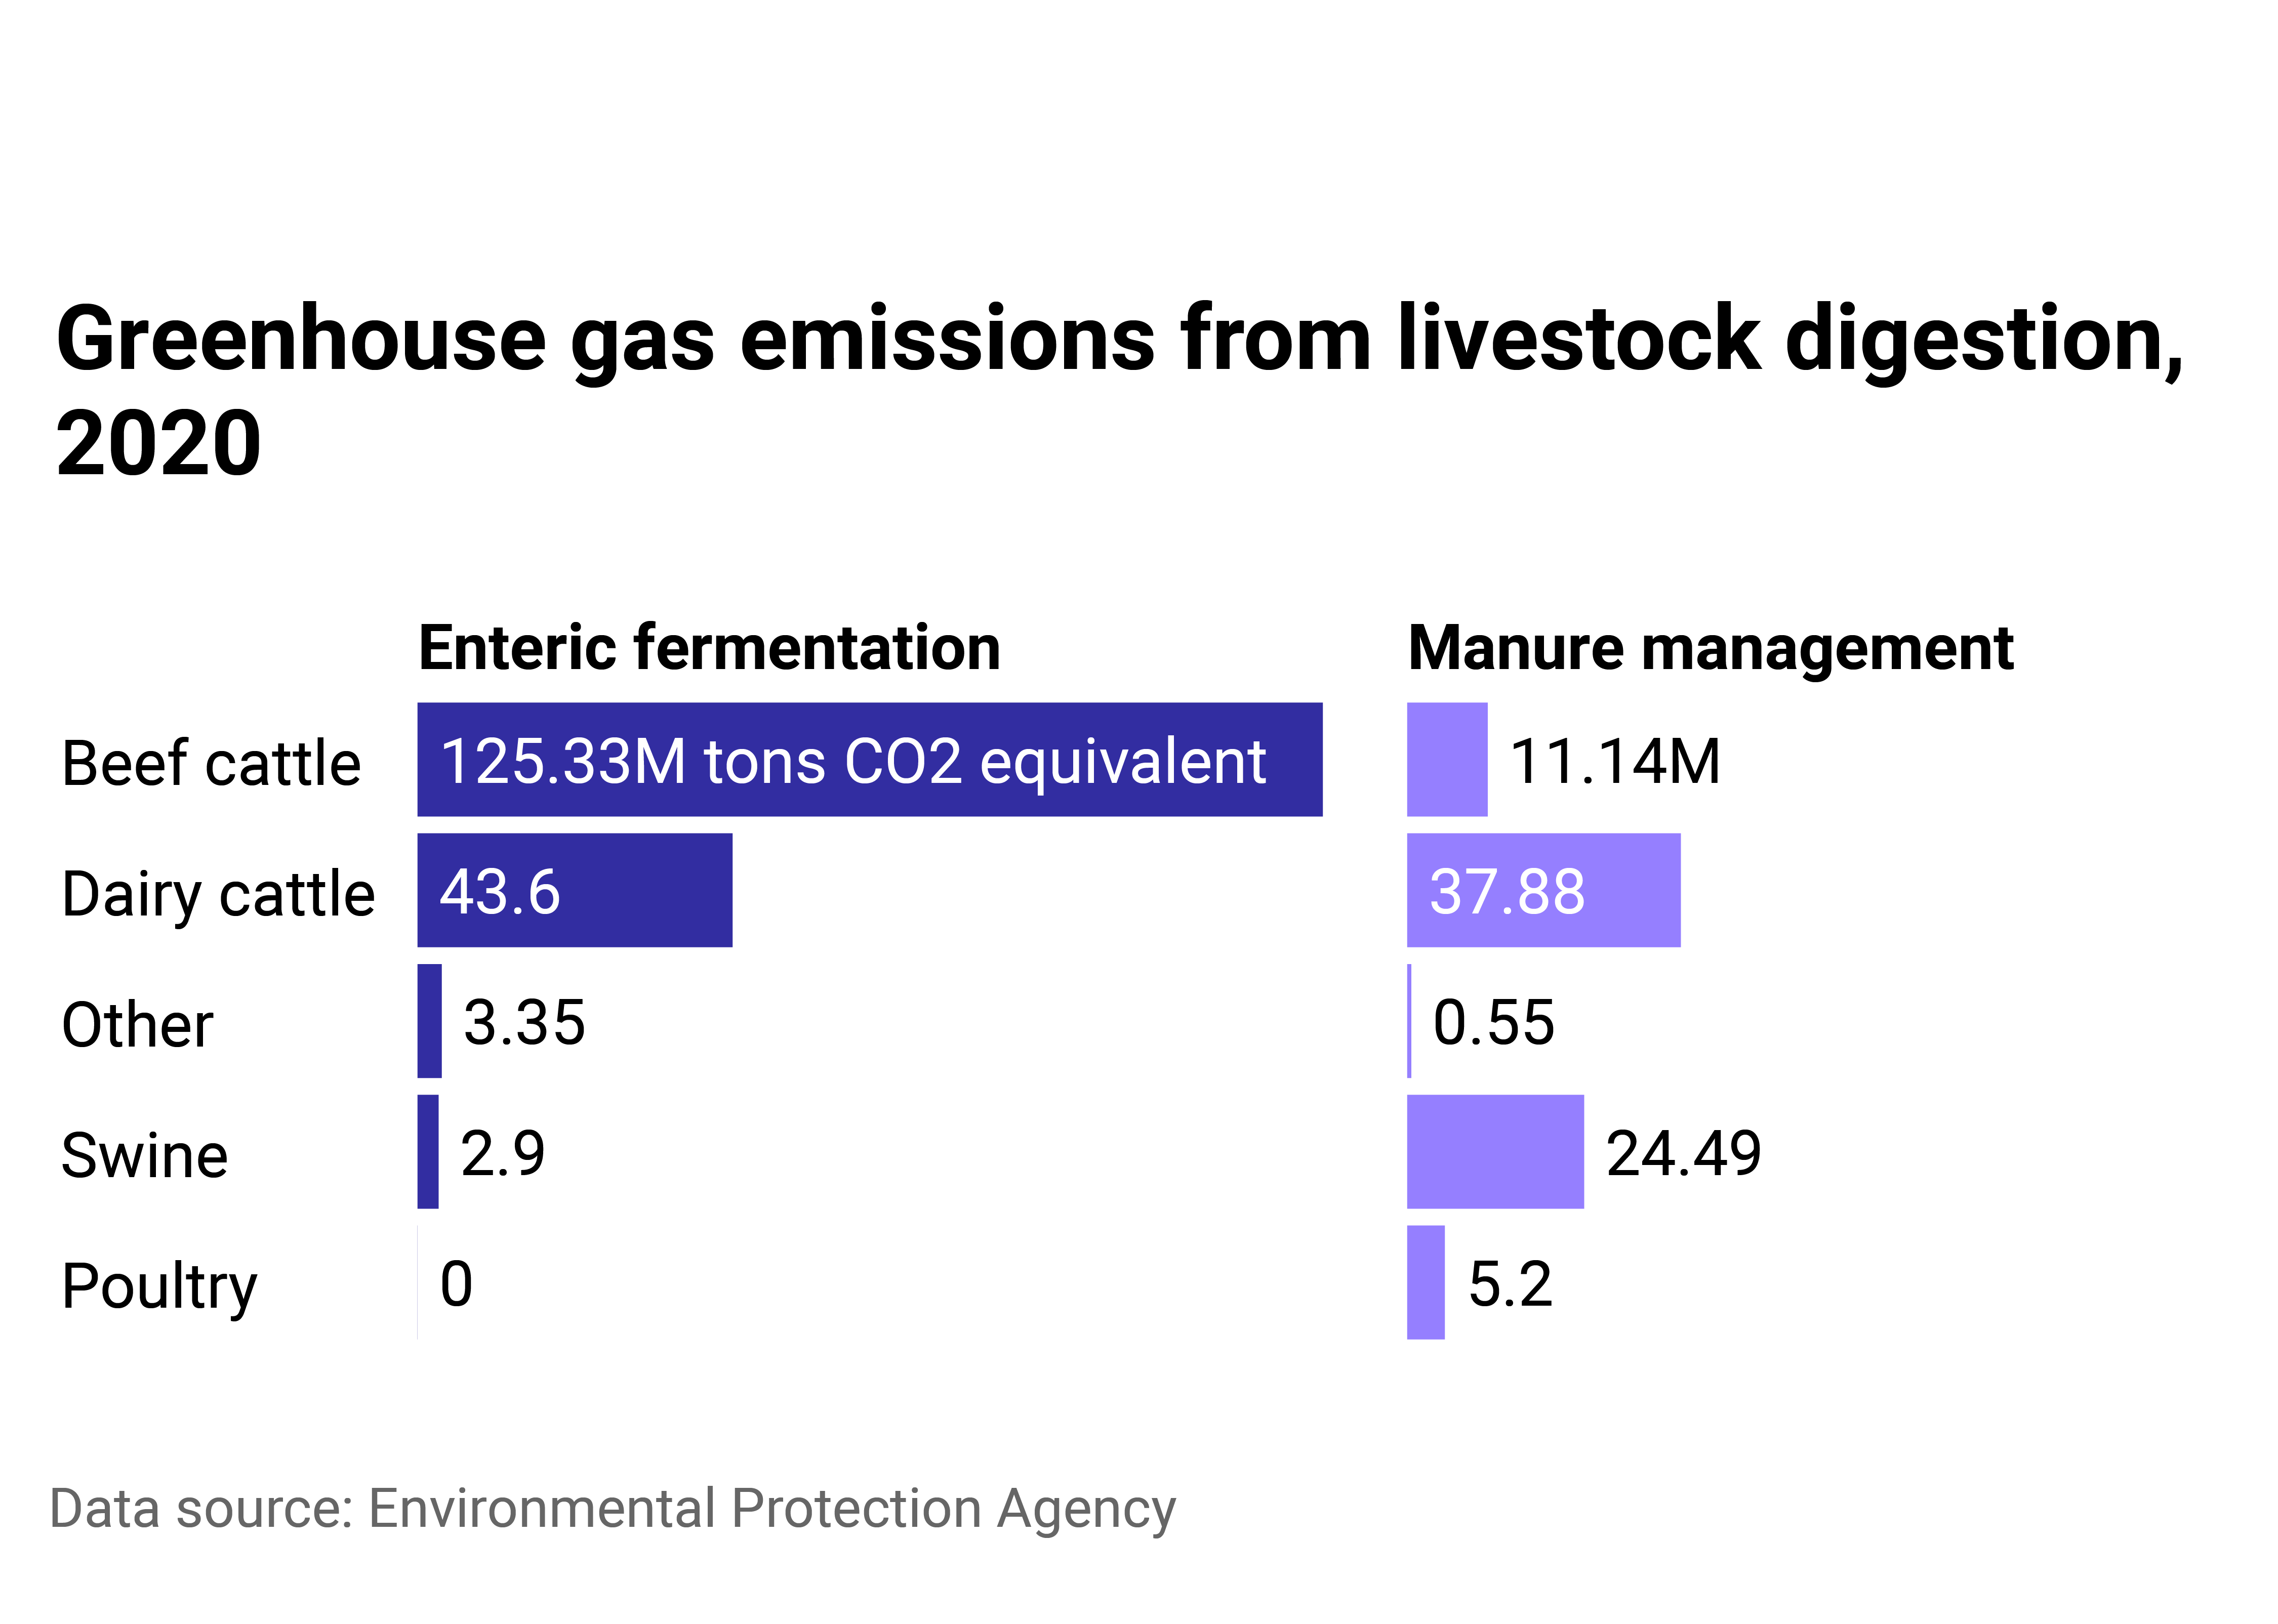 Dual donut chart of emissions from manure and enteric fermentation by type of livestock. Cattle contribute the most for both